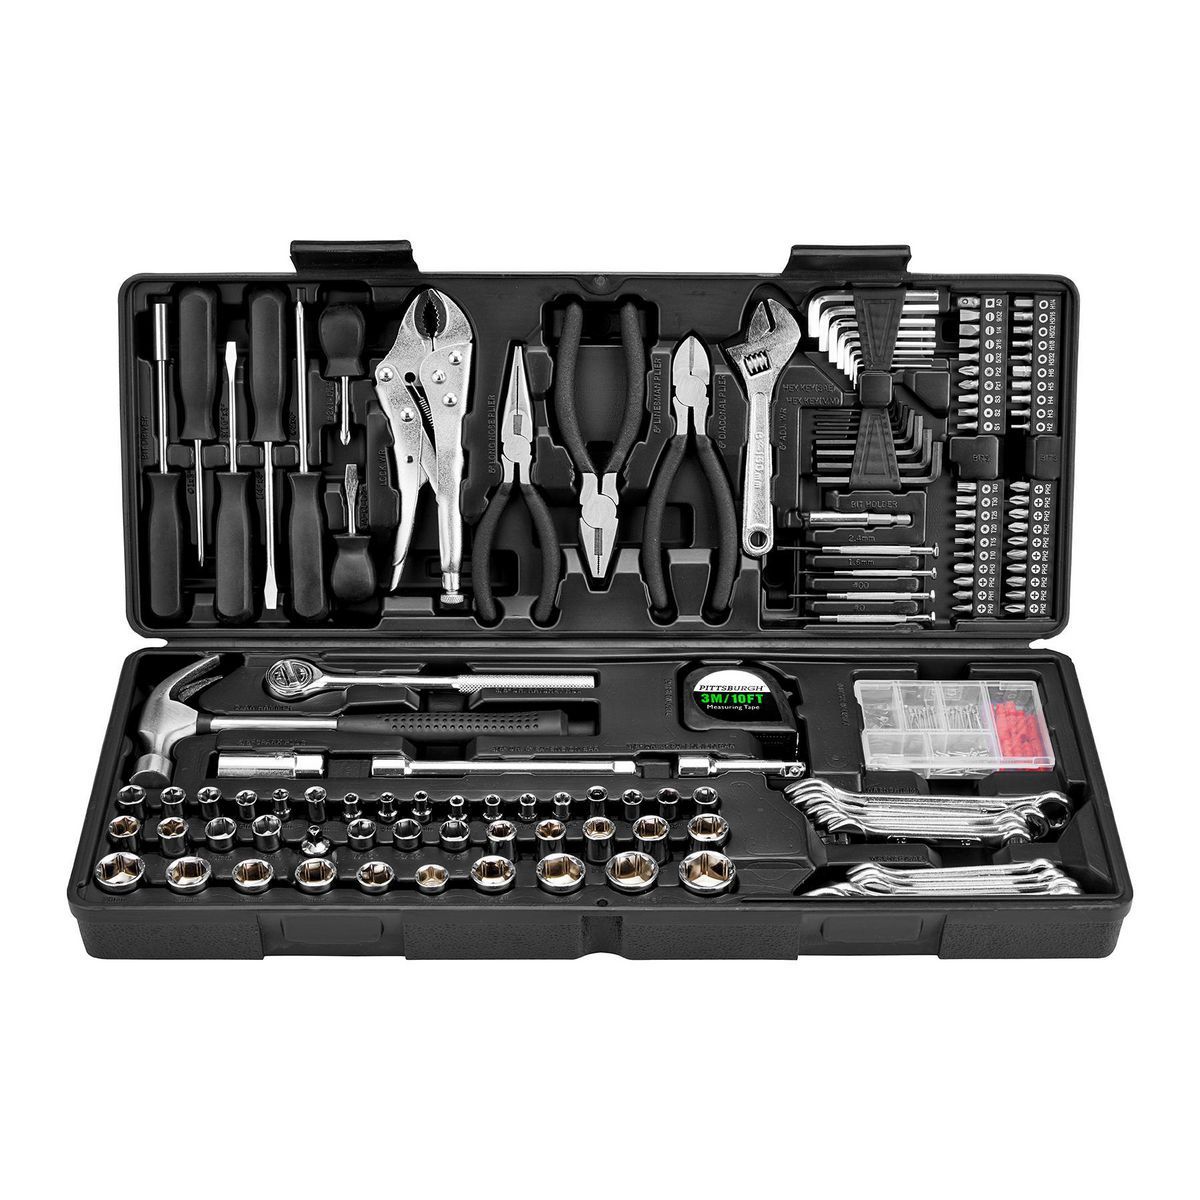 The 130-Piece Tool Set neatly organized in its durable carrying case.